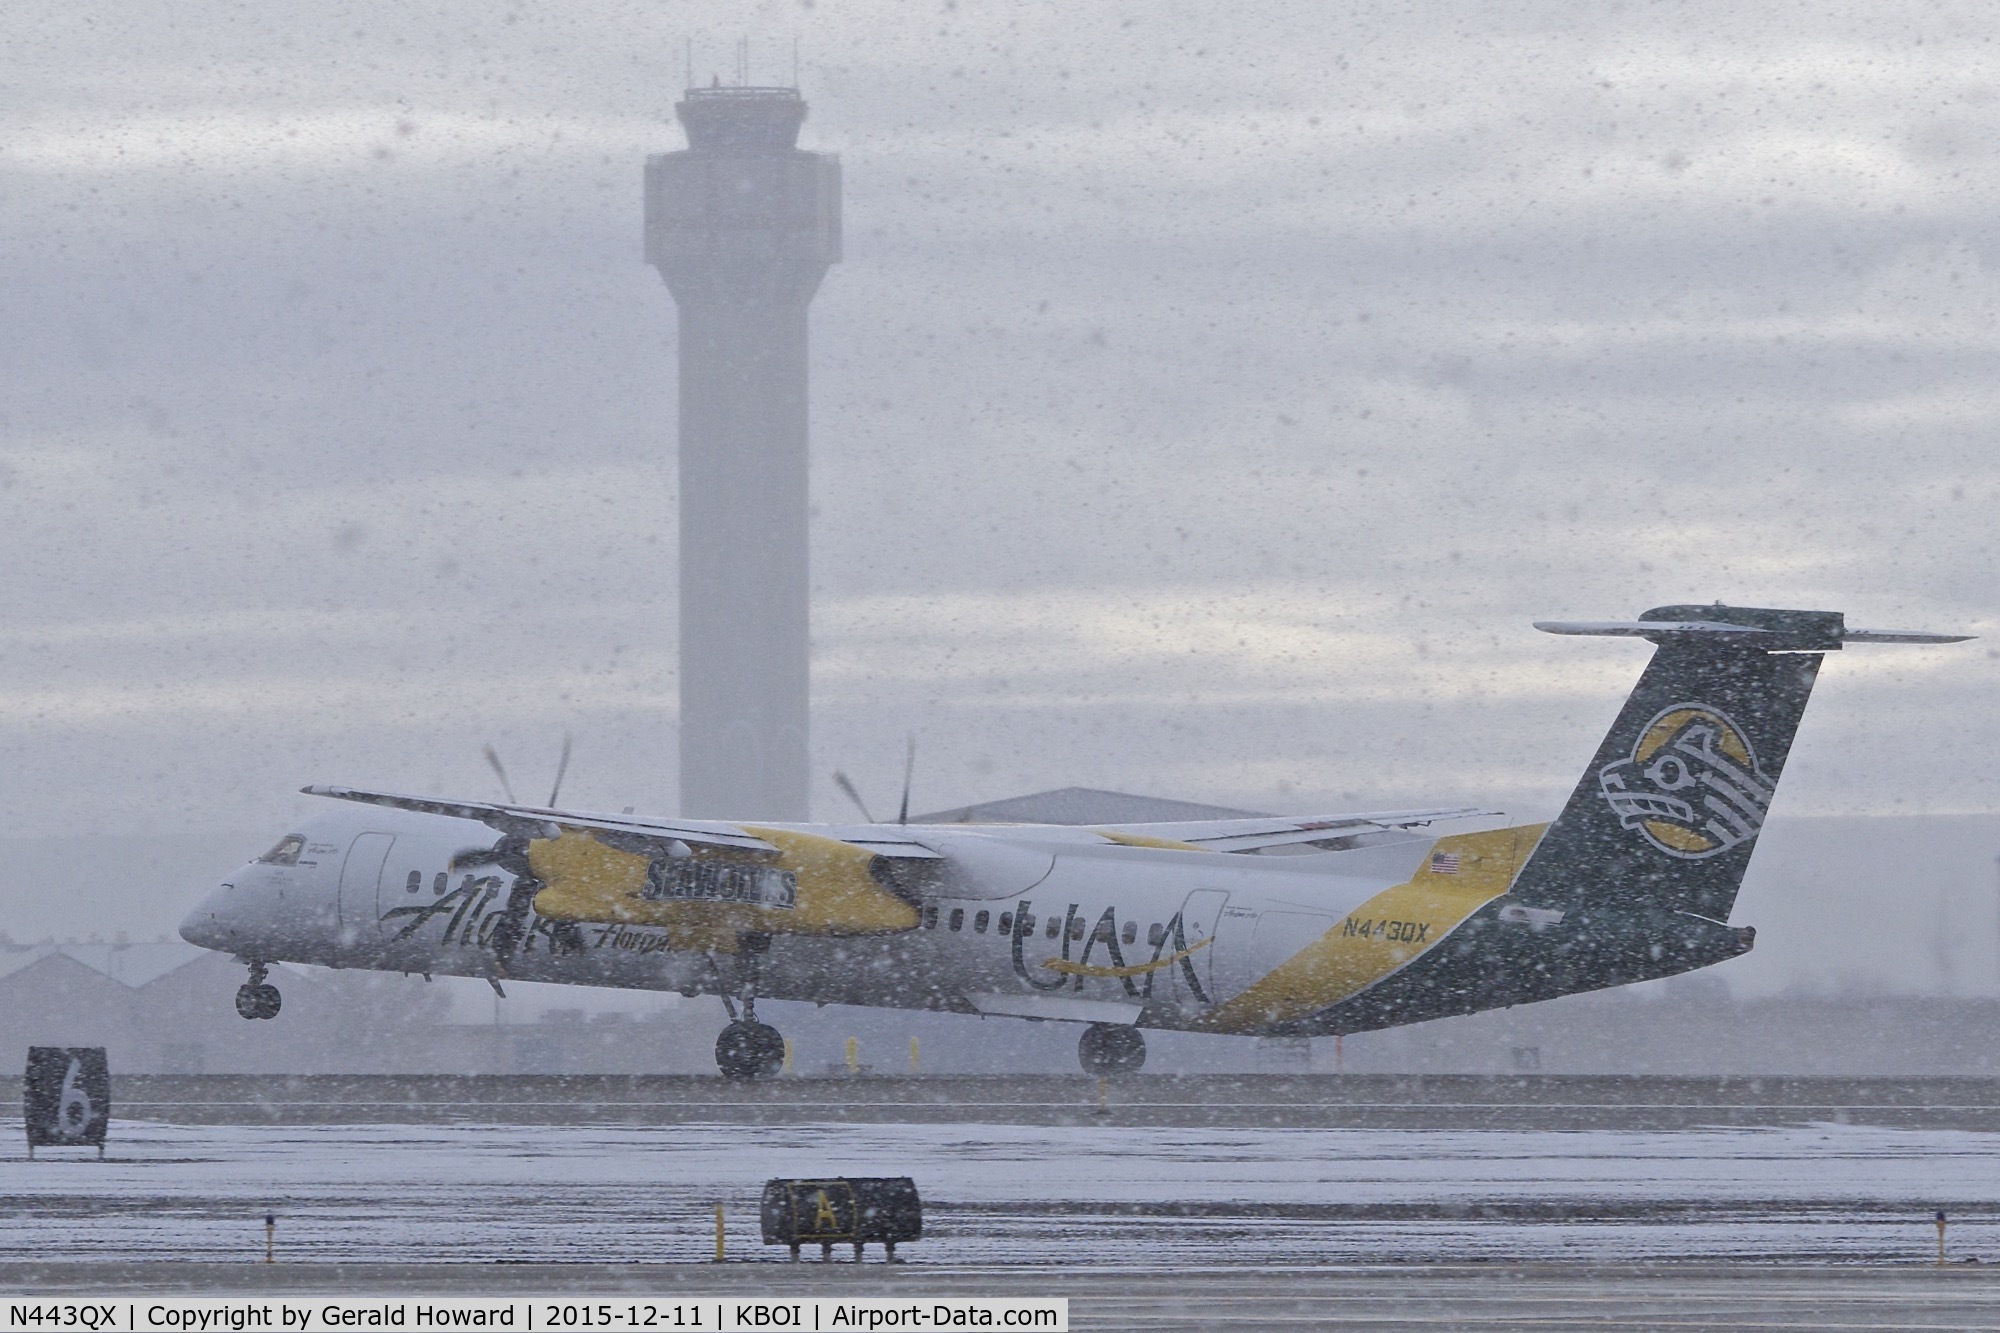 N443QX, 2010 Bombardier DHC-8-402 Dash 8 C/N 4353, Departing RWY 10L at the start of the snow storm.